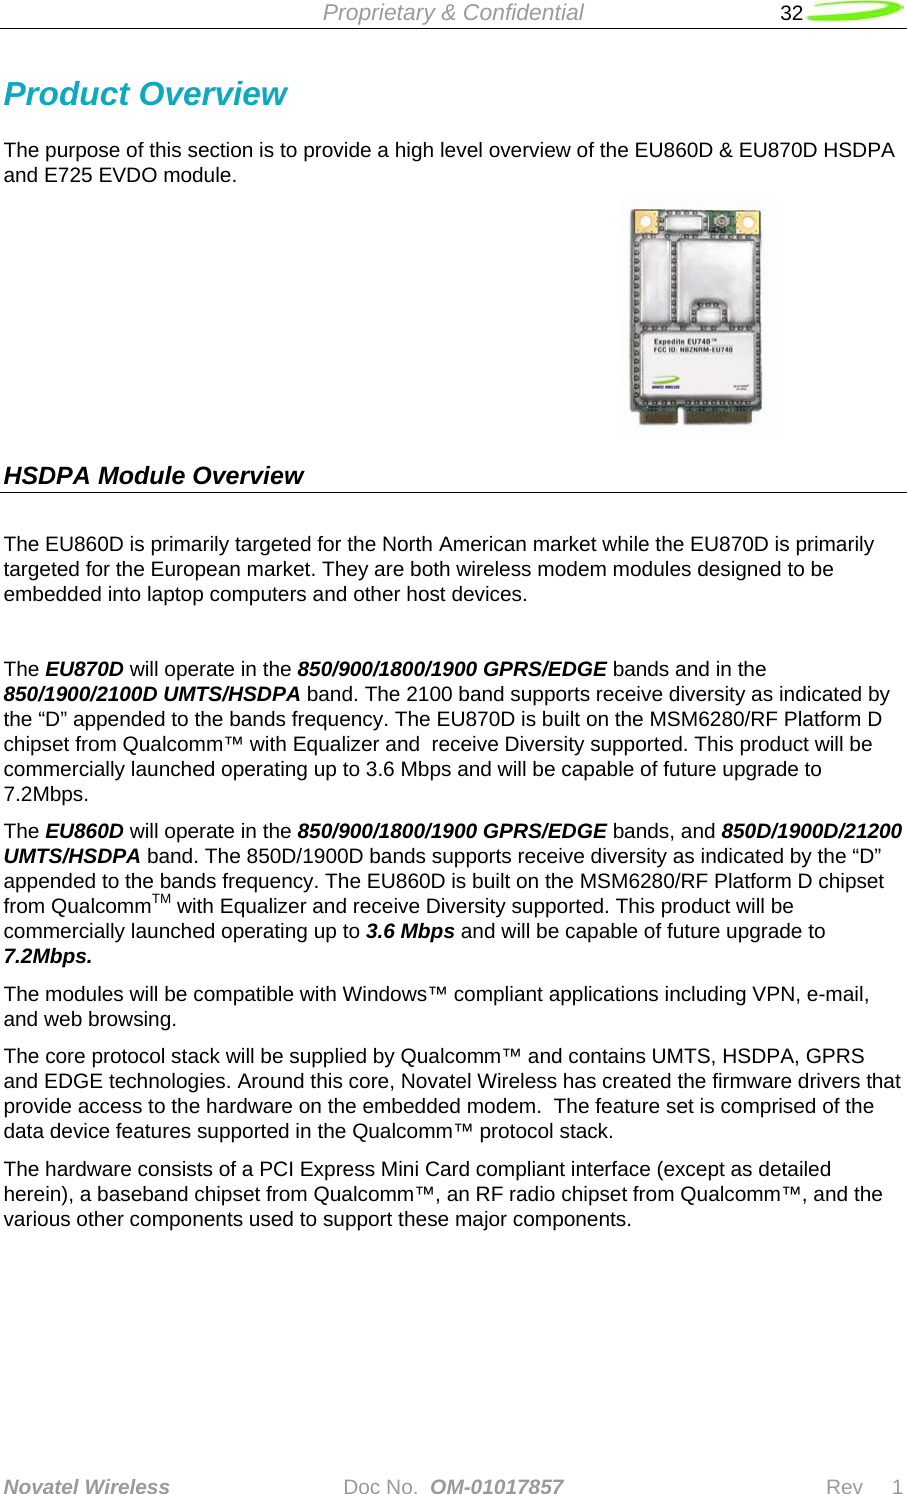  Proprietary &amp; Confidential   32   Novatel Wireless   Doc No.  OM-01017857                              Rev     1  Product Overview The purpose of this section is to provide a high level overview of the EU860D &amp; EU870D HSDPA and E725 EVDO module.                                HSDPA Module Overview     The EU860D is primarily targeted for the North American market while the EU870D is primarily targeted for the European market. They are both wireless modem modules designed to be embedded into laptop computers and other host devices.  The EU870D will operate in the 850/900/1800/1900 GPRS/EDGE bands and in the 850/1900/2100D UMTS/HSDPA band. The 2100 band supports receive diversity as indicated by the “D” appended to the bands frequency. The EU870D is built on the MSM6280/RF Platform D chipset from Qualcomm™ with Equalizer and  receive Diversity supported. This product will be commercially launched operating up to 3.6 Mbps and will be capable of future upgrade to 7.2Mbps.  The EU860D will operate in the 850/900/1800/1900 GPRS/EDGE bands, and 850D/1900D/21200 UMTS/HSDPA band. The 850D/1900D bands supports receive diversity as indicated by the “D” appended to the bands frequency. The EU860D is built on the MSM6280/RF Platform D chipset from QualcommTM with Equalizer and receive Diversity supported. This product will be commercially launched operating up to 3.6 Mbps and will be capable of future upgrade to 7.2Mbps.  The modules will be compatible with Windows™ compliant applications including VPN, e-mail, and web browsing.  The core protocol stack will be supplied by Qualcomm™ and contains UMTS, HSDPA, GPRS and EDGE technologies. Around this core, Novatel Wireless has created the firmware drivers that provide access to the hardware on the embedded modem.  The feature set is comprised of the data device features supported in the Qualcomm™ protocol stack.  The hardware consists of a PCI Express Mini Card compliant interface (except as detailed herein), a baseband chipset from Qualcomm™, an RF radio chipset from Qualcomm™, and the various other components used to support these major components.          